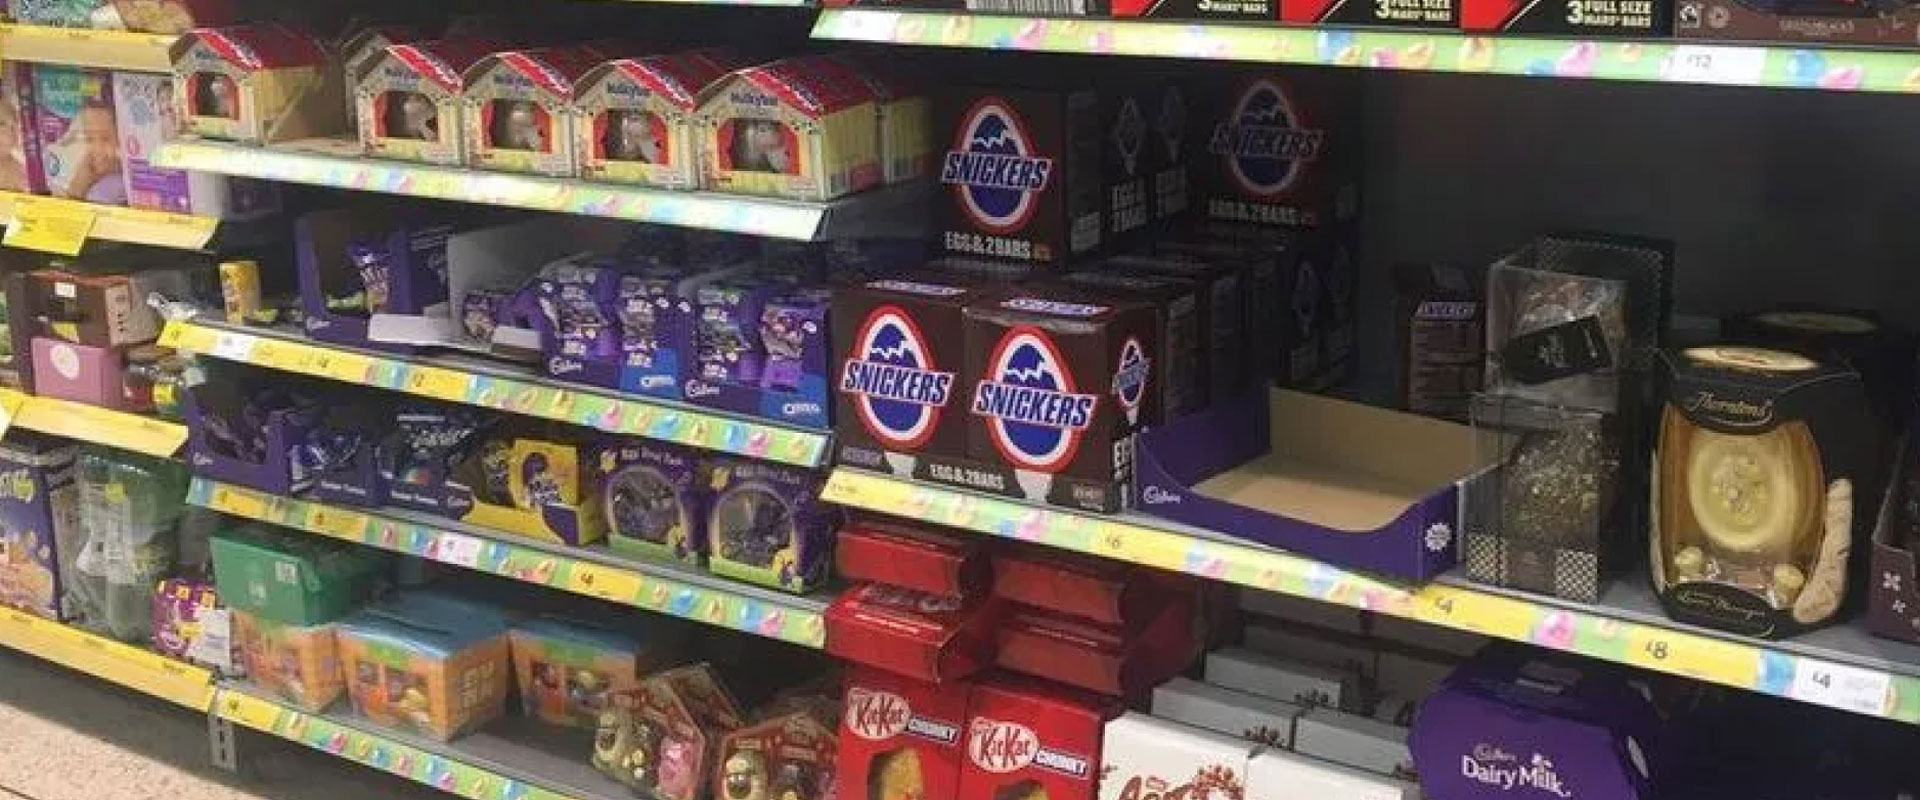 I ditched ASDA and Morrisons and found a little-known discount store selling 10p branded Easter eggs